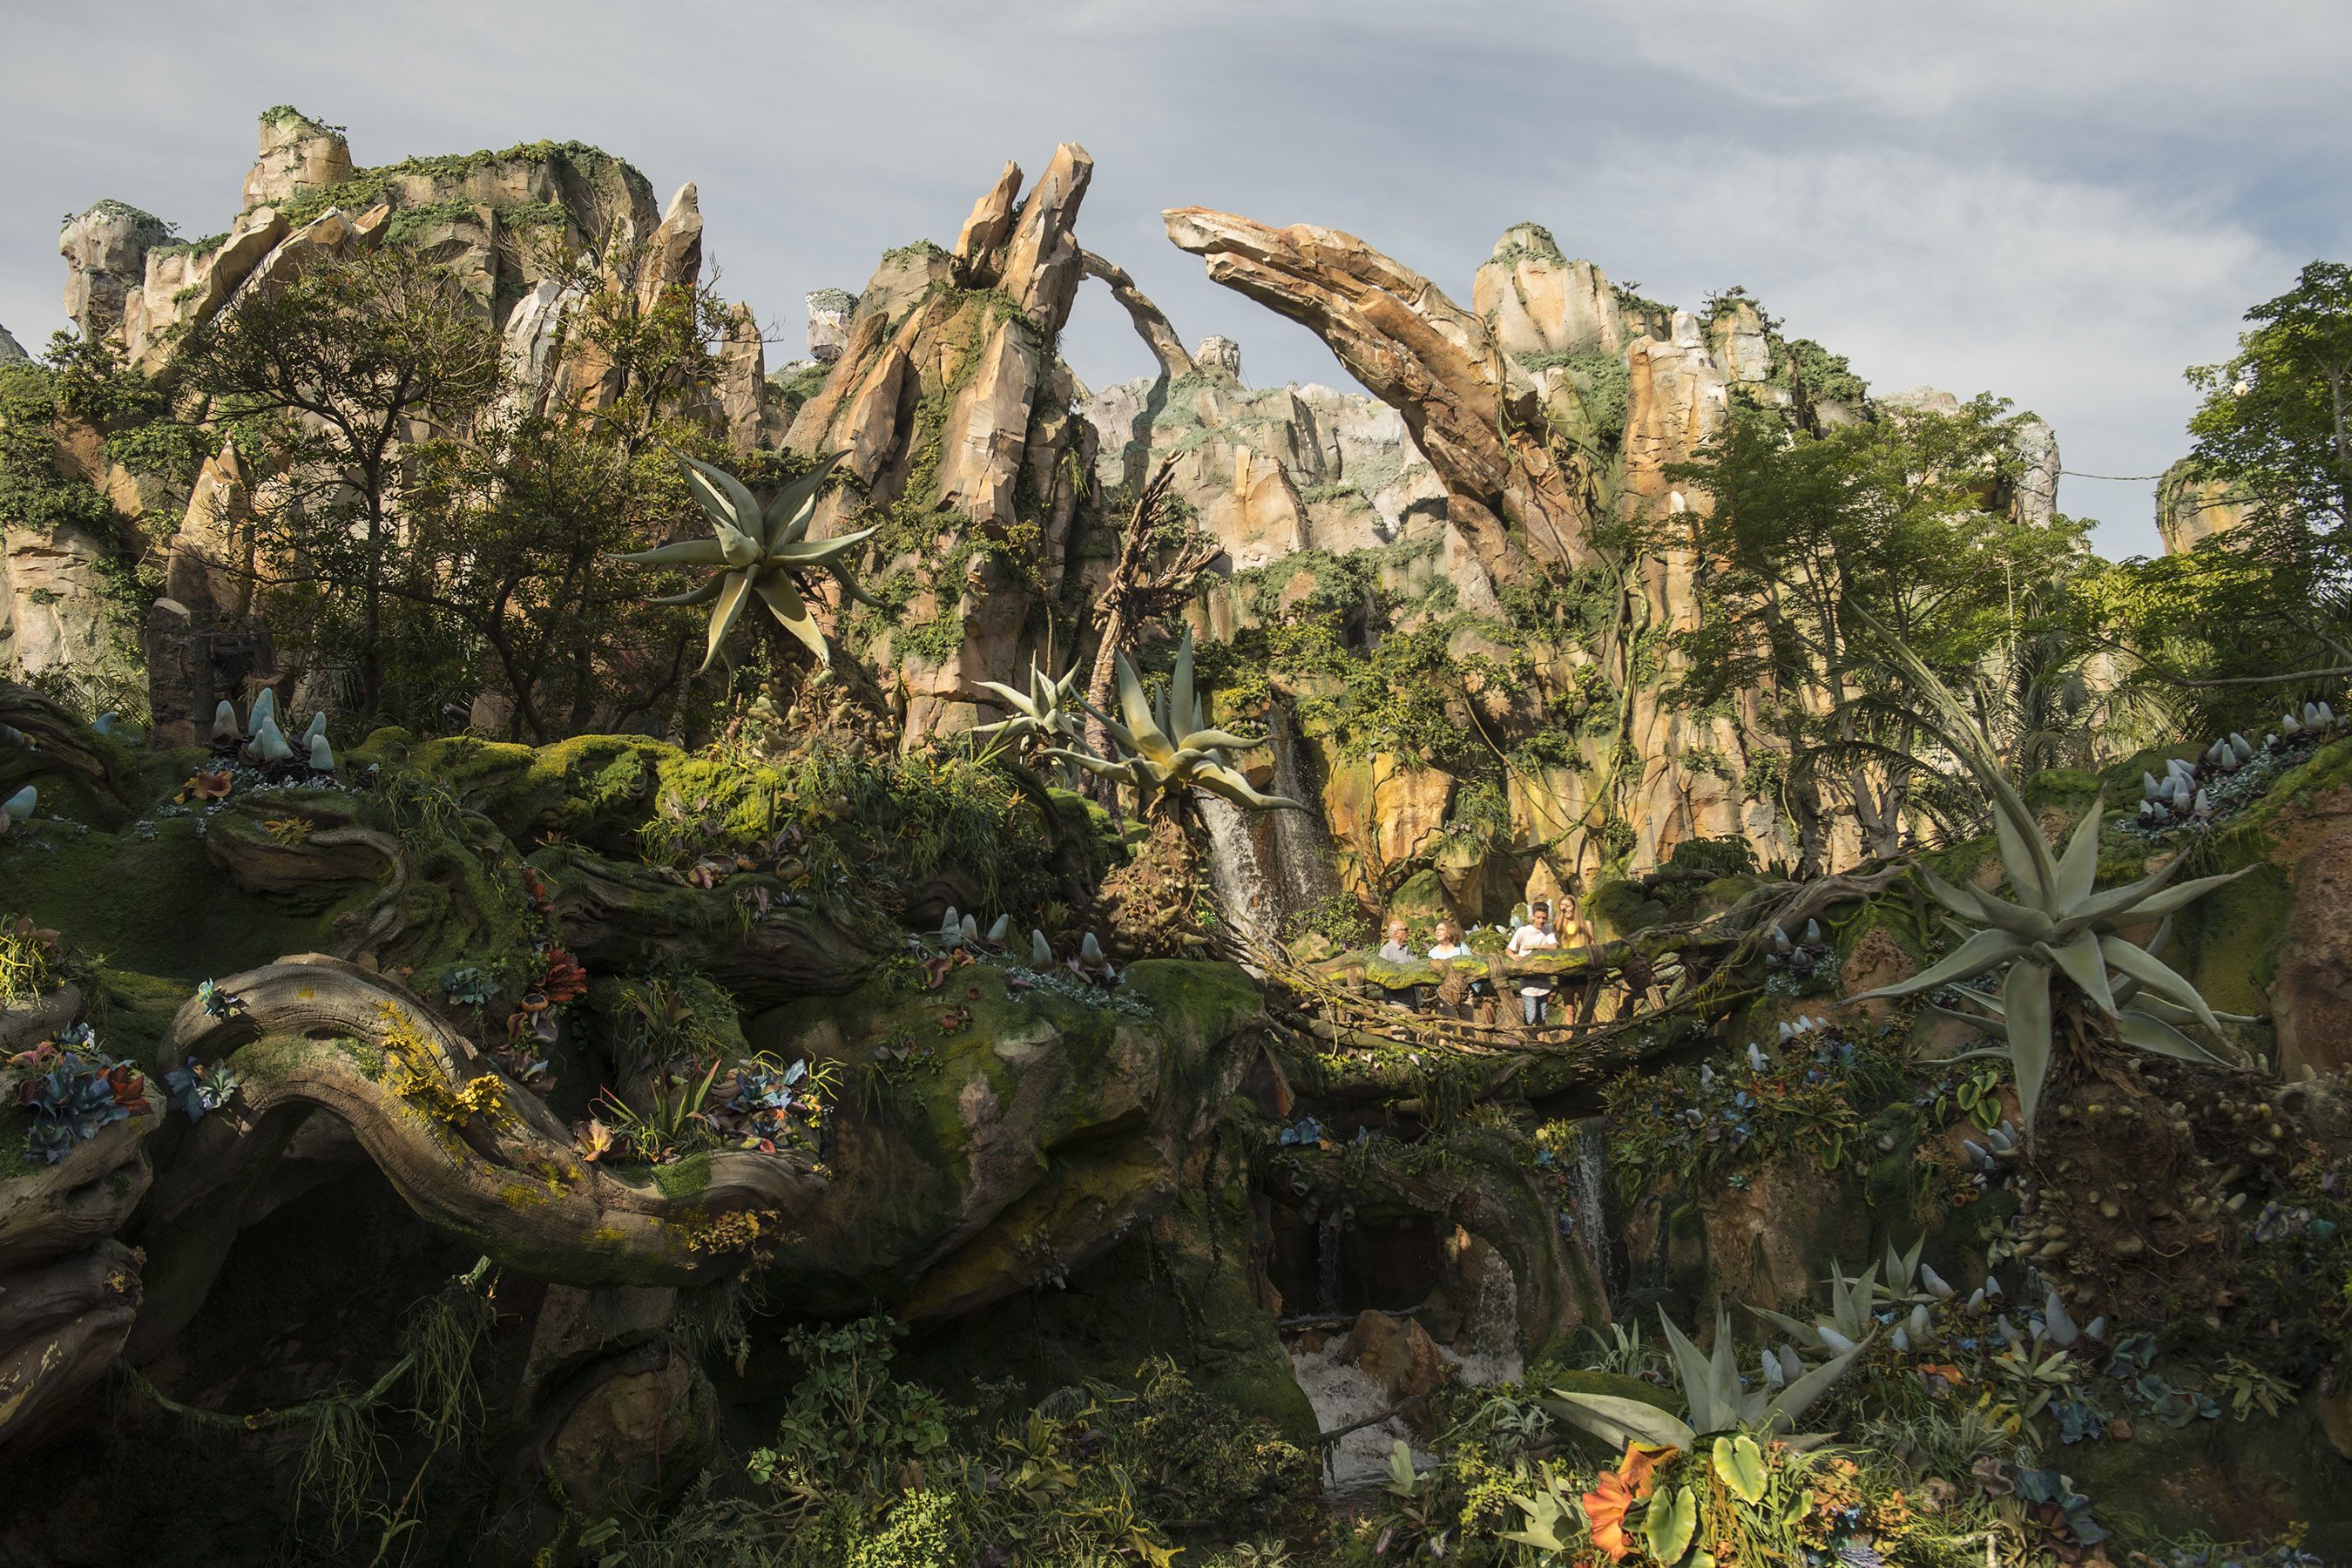 First look at Disney's Avatar-themed land